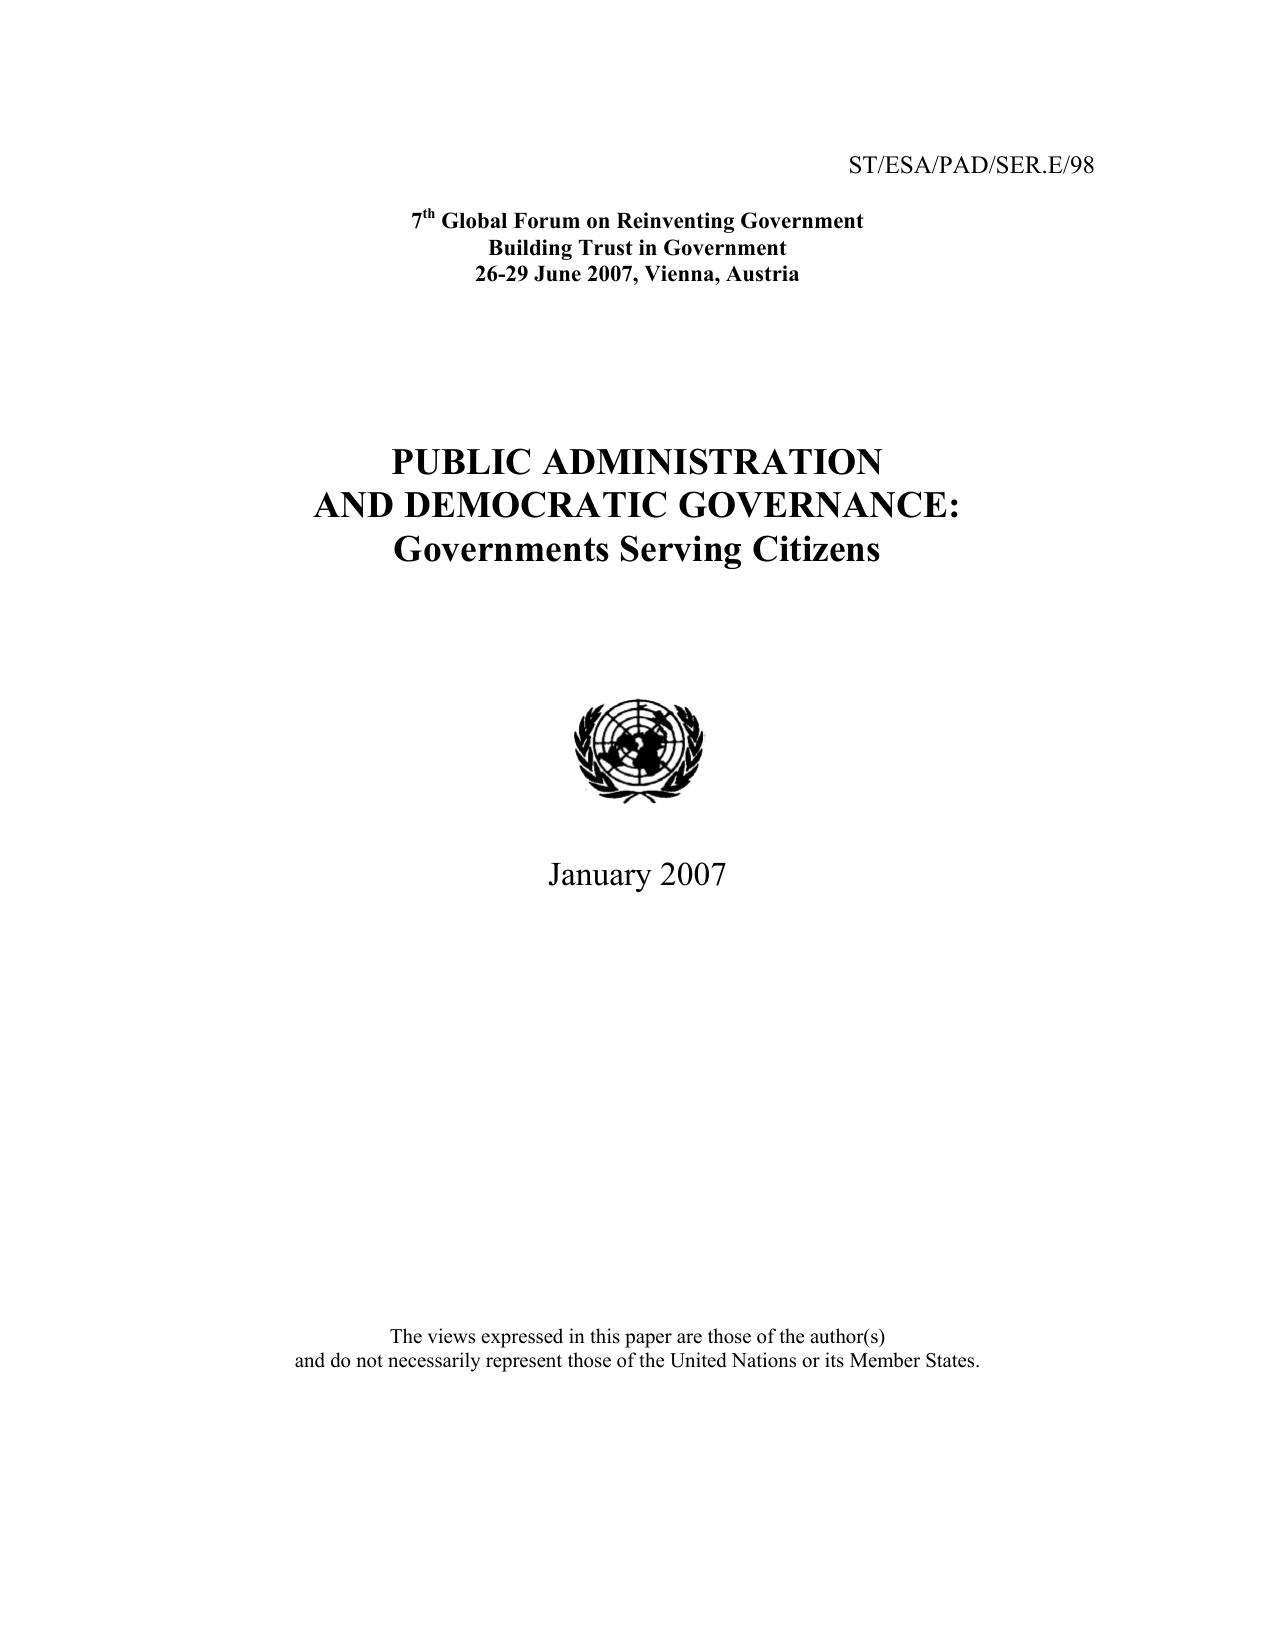 Public Administration and Democratic Governance: Governments Serving Citizens